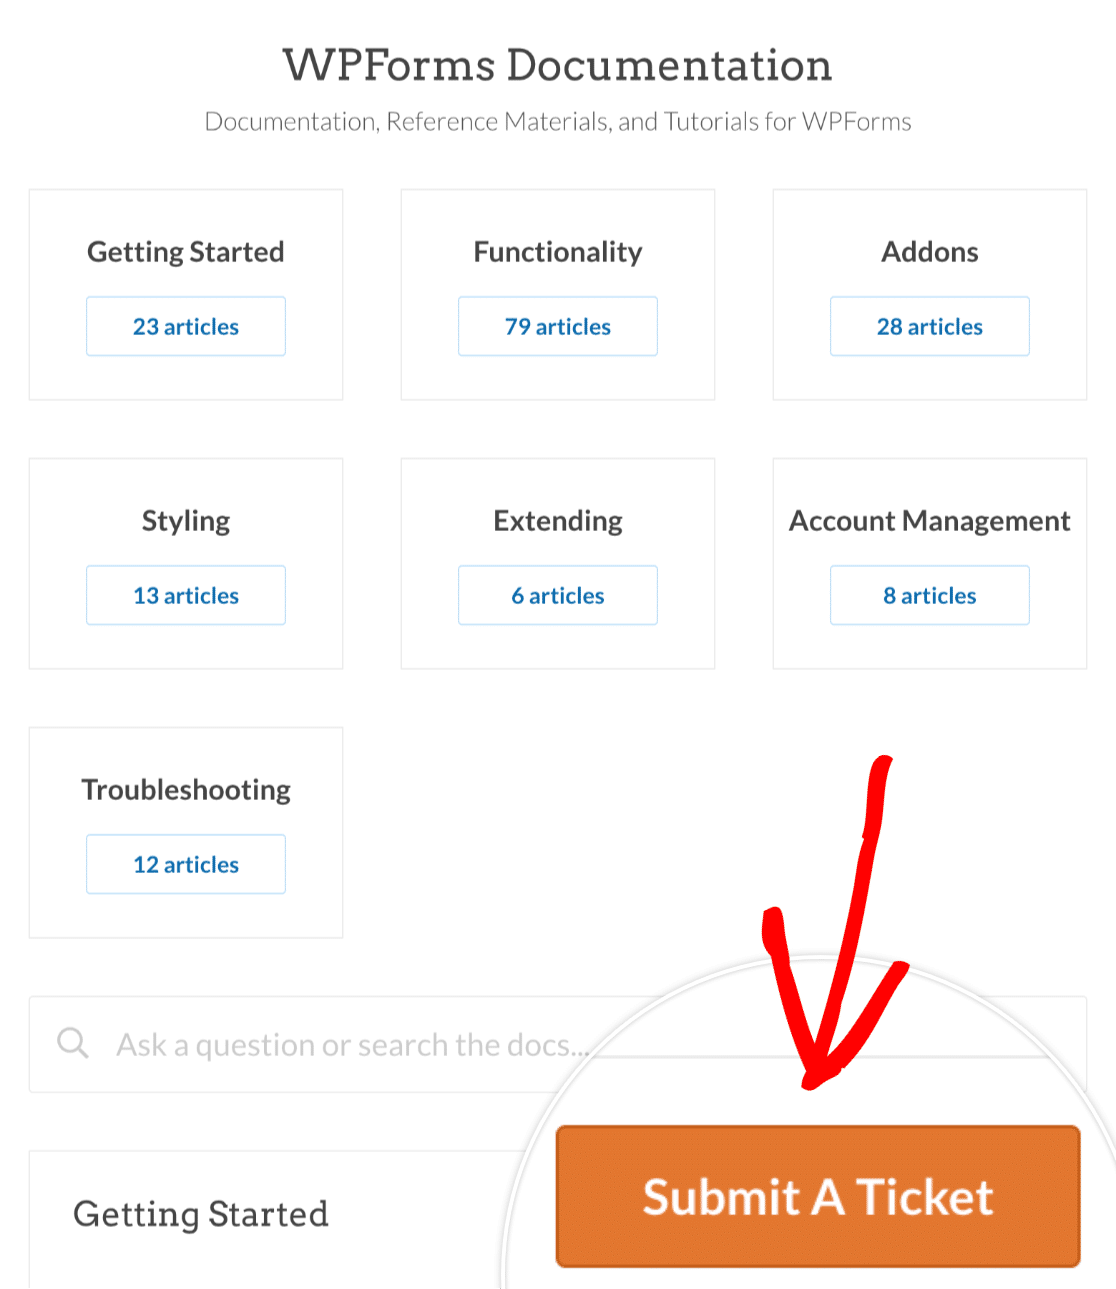 Submit a ticket button